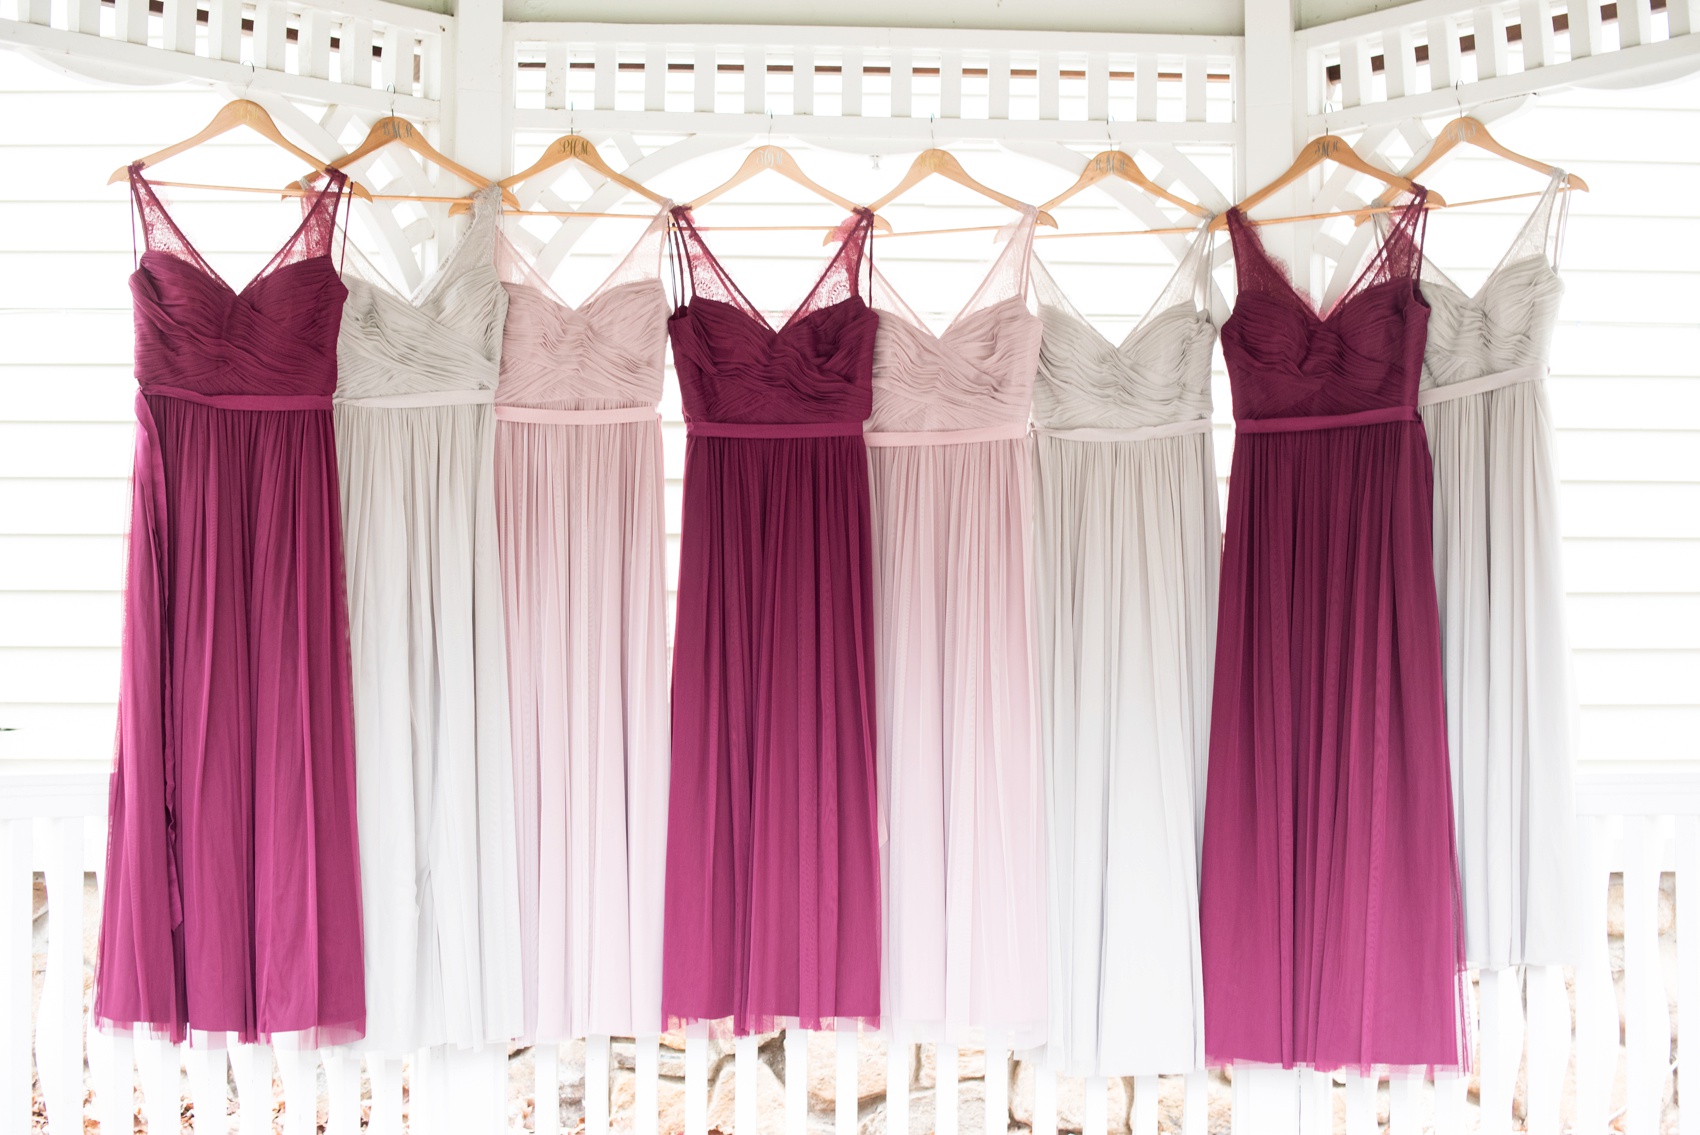 Bridesmaids gowns photo in burgundy, blush and grey by Mikkel Paige Photography, NYC and Raleigh wedding photographer. Wedding at The Olde Mill Inn in New Jersey.